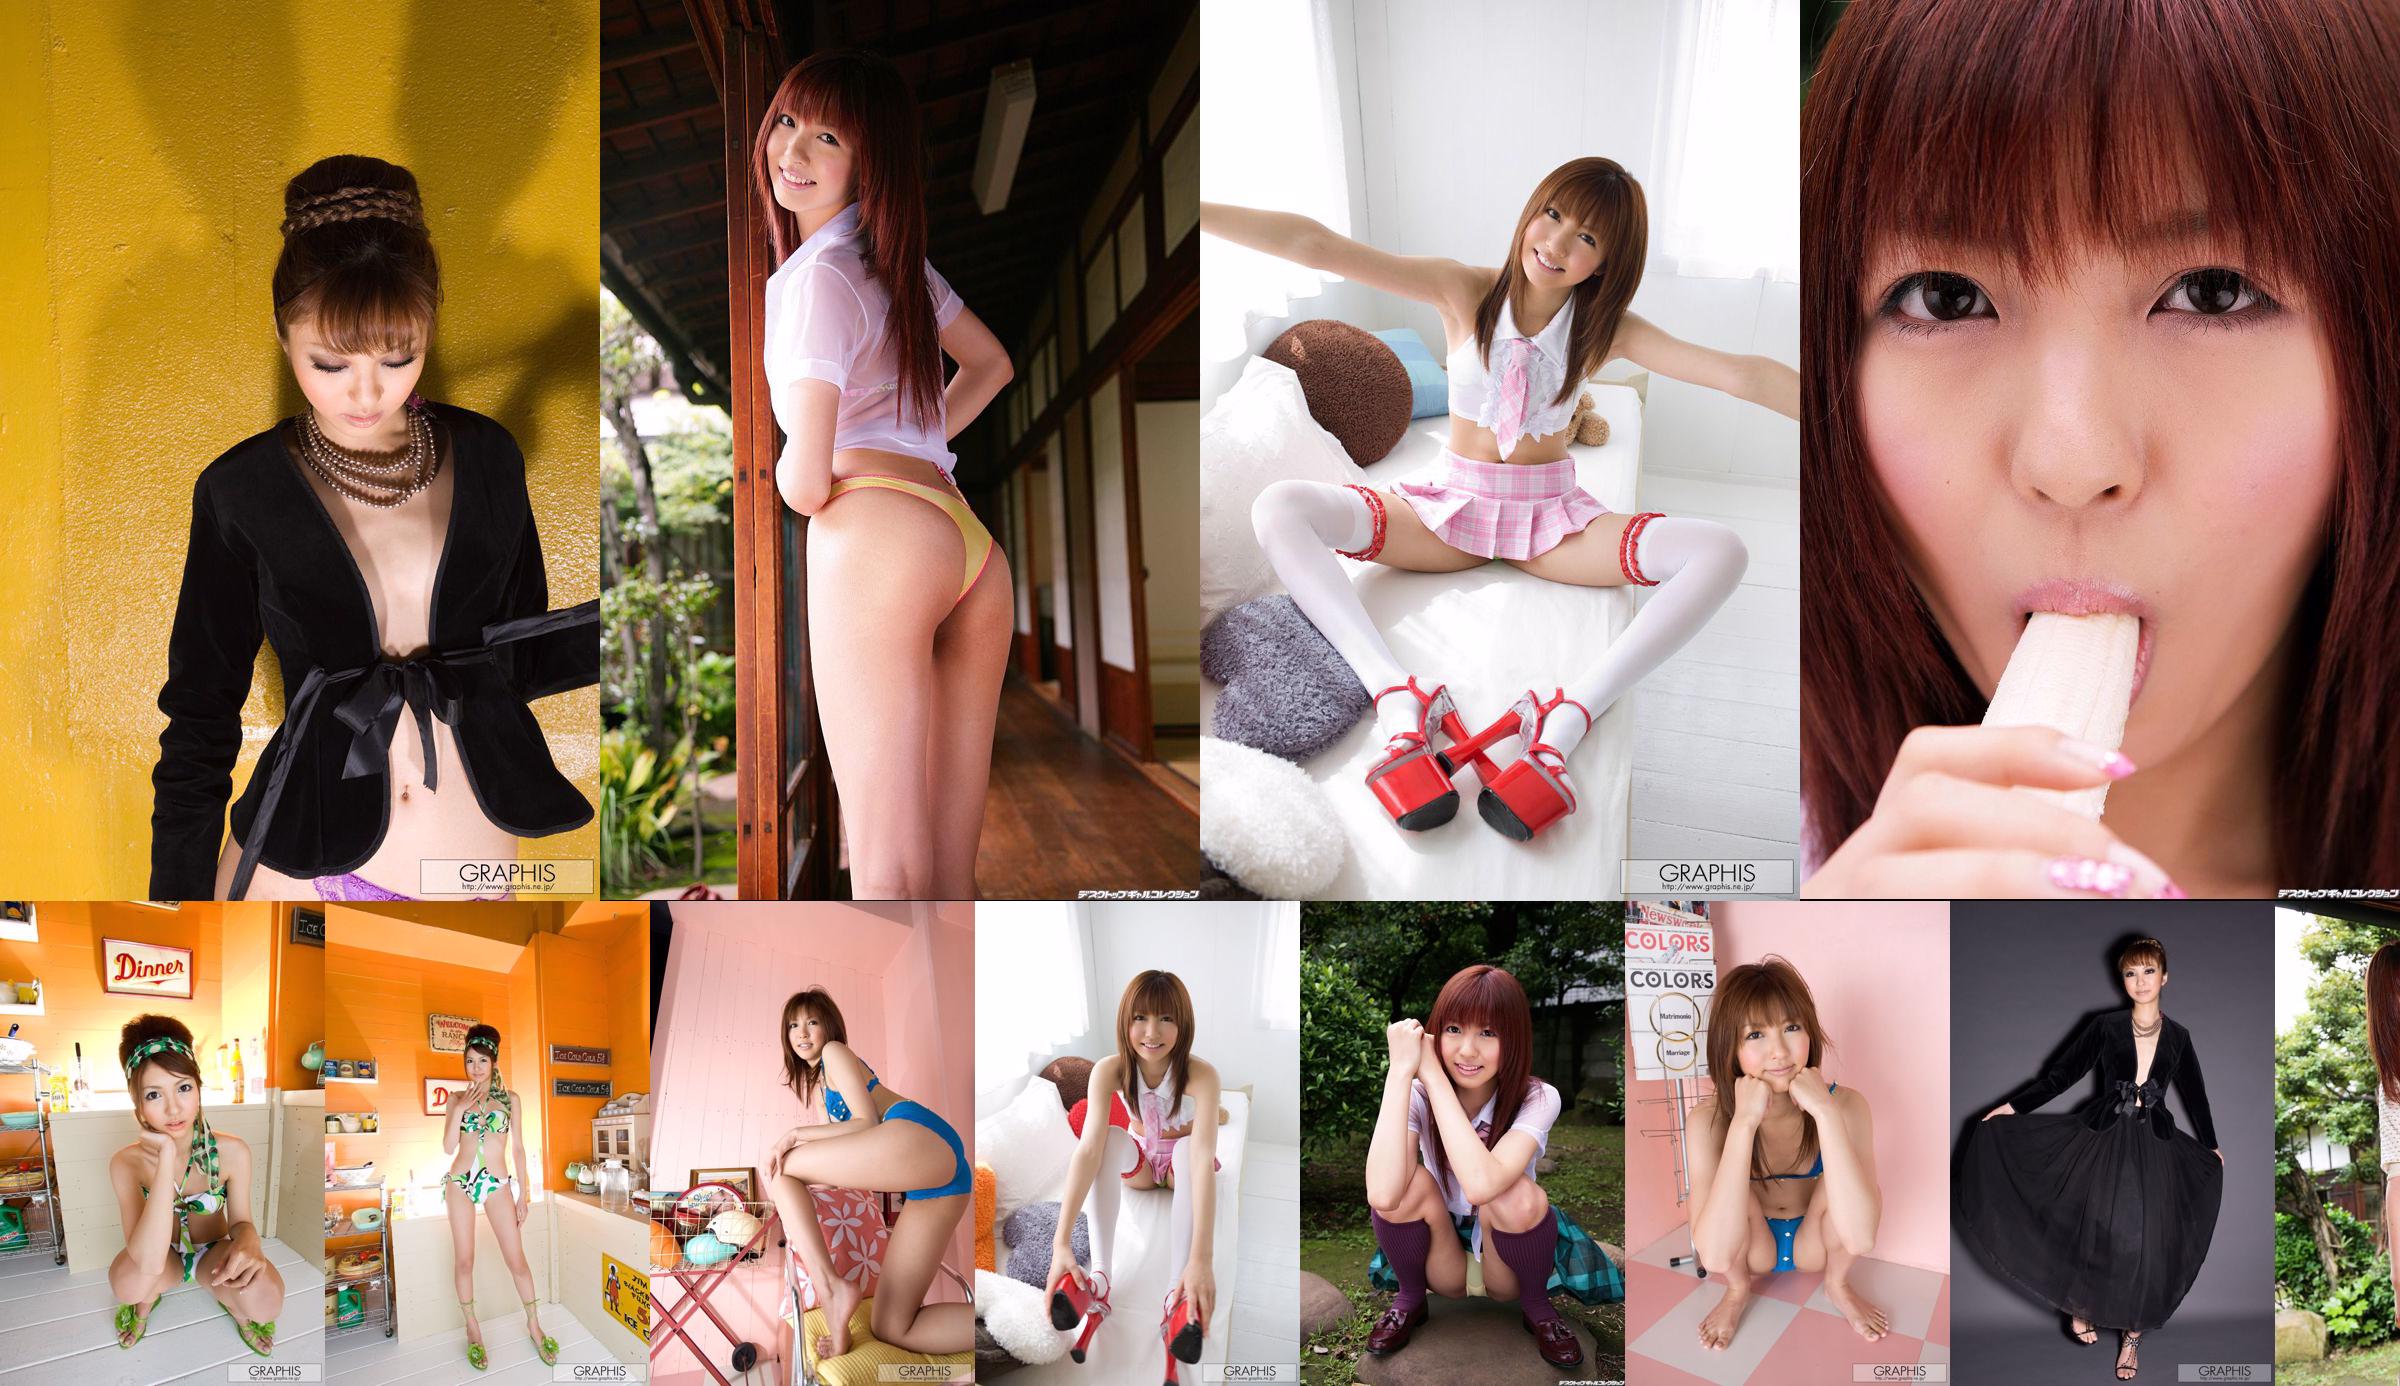 Guoer Victoria "The Tyrant Jin Guoer in the Sun" [美媛館MyGirl] Vol.183 No.be10b8 Page 1